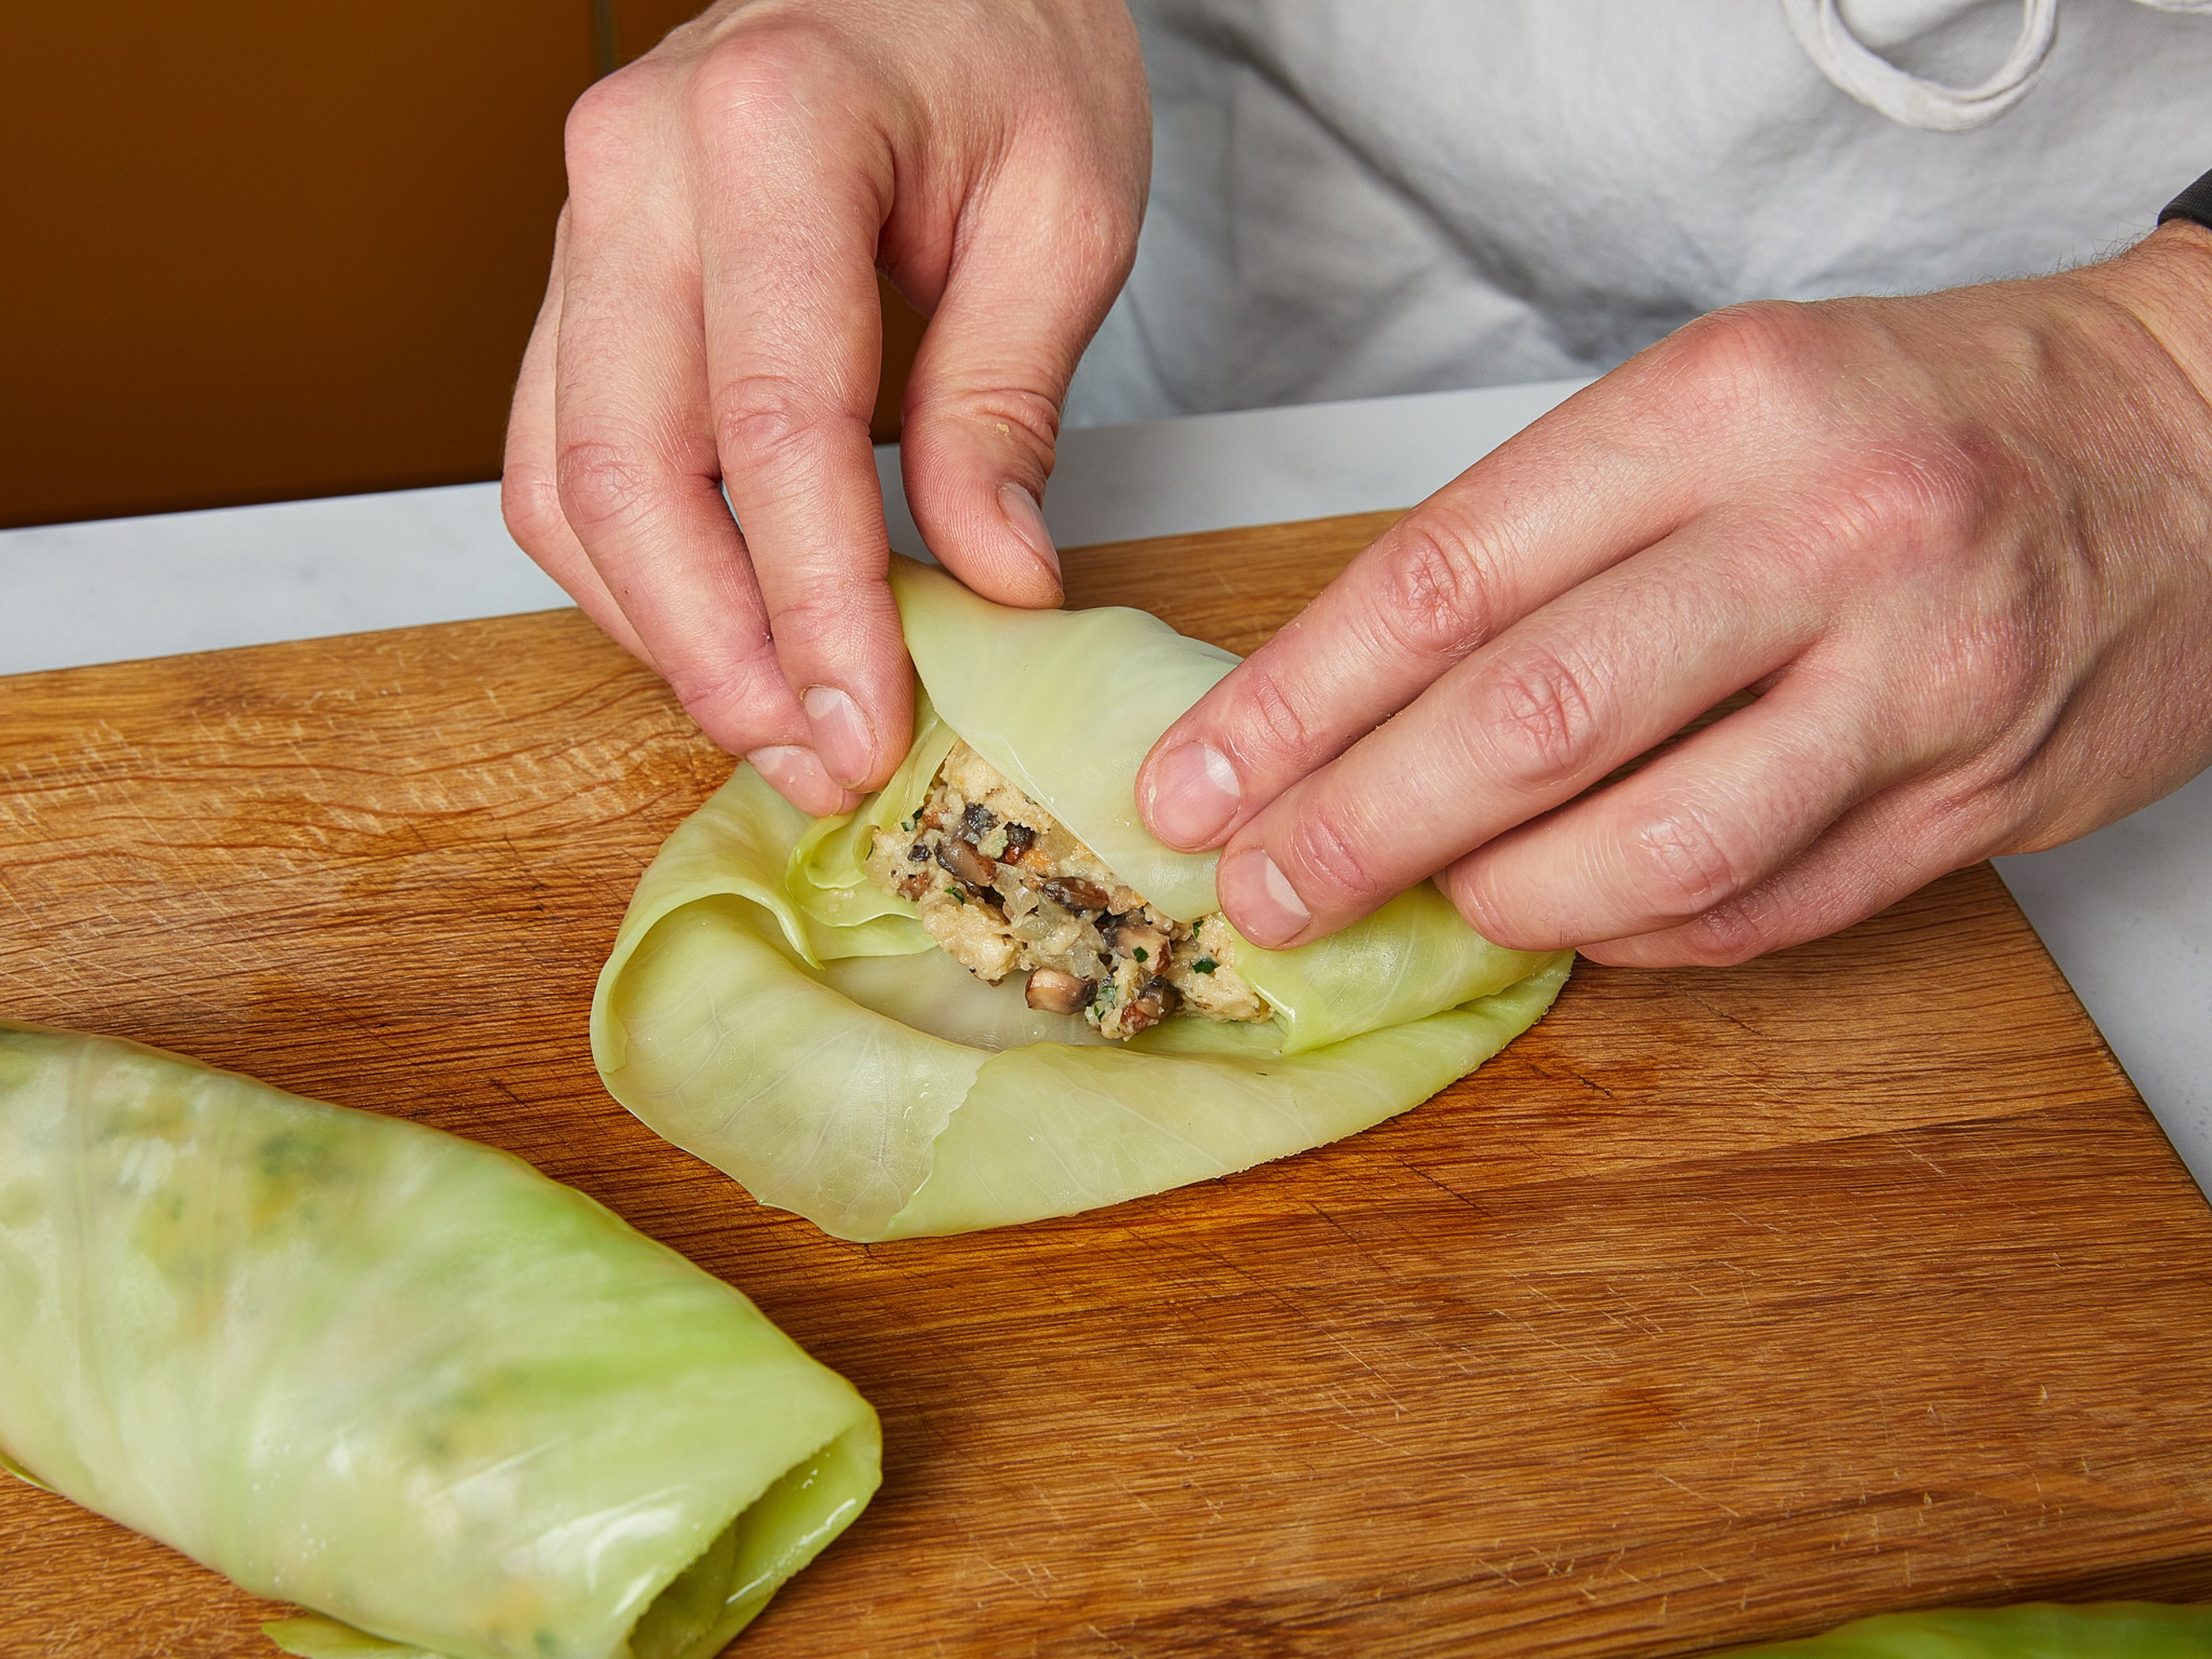 Add the bread cubes, half of the chopped parsley and the onion-milk mixture to a large bowl and gently knead into a sort of dumpling filling. Scoop approx. 2–3 tbsp of the filling onto the center of a cabbage leaf, roll it up and set aside. To do this, fold both sides over the filling and roll up from the stalk. Continue with the remaining cabbage leaves. If needed, seal cabbage rolls with a toothpick or some kitchen twine.